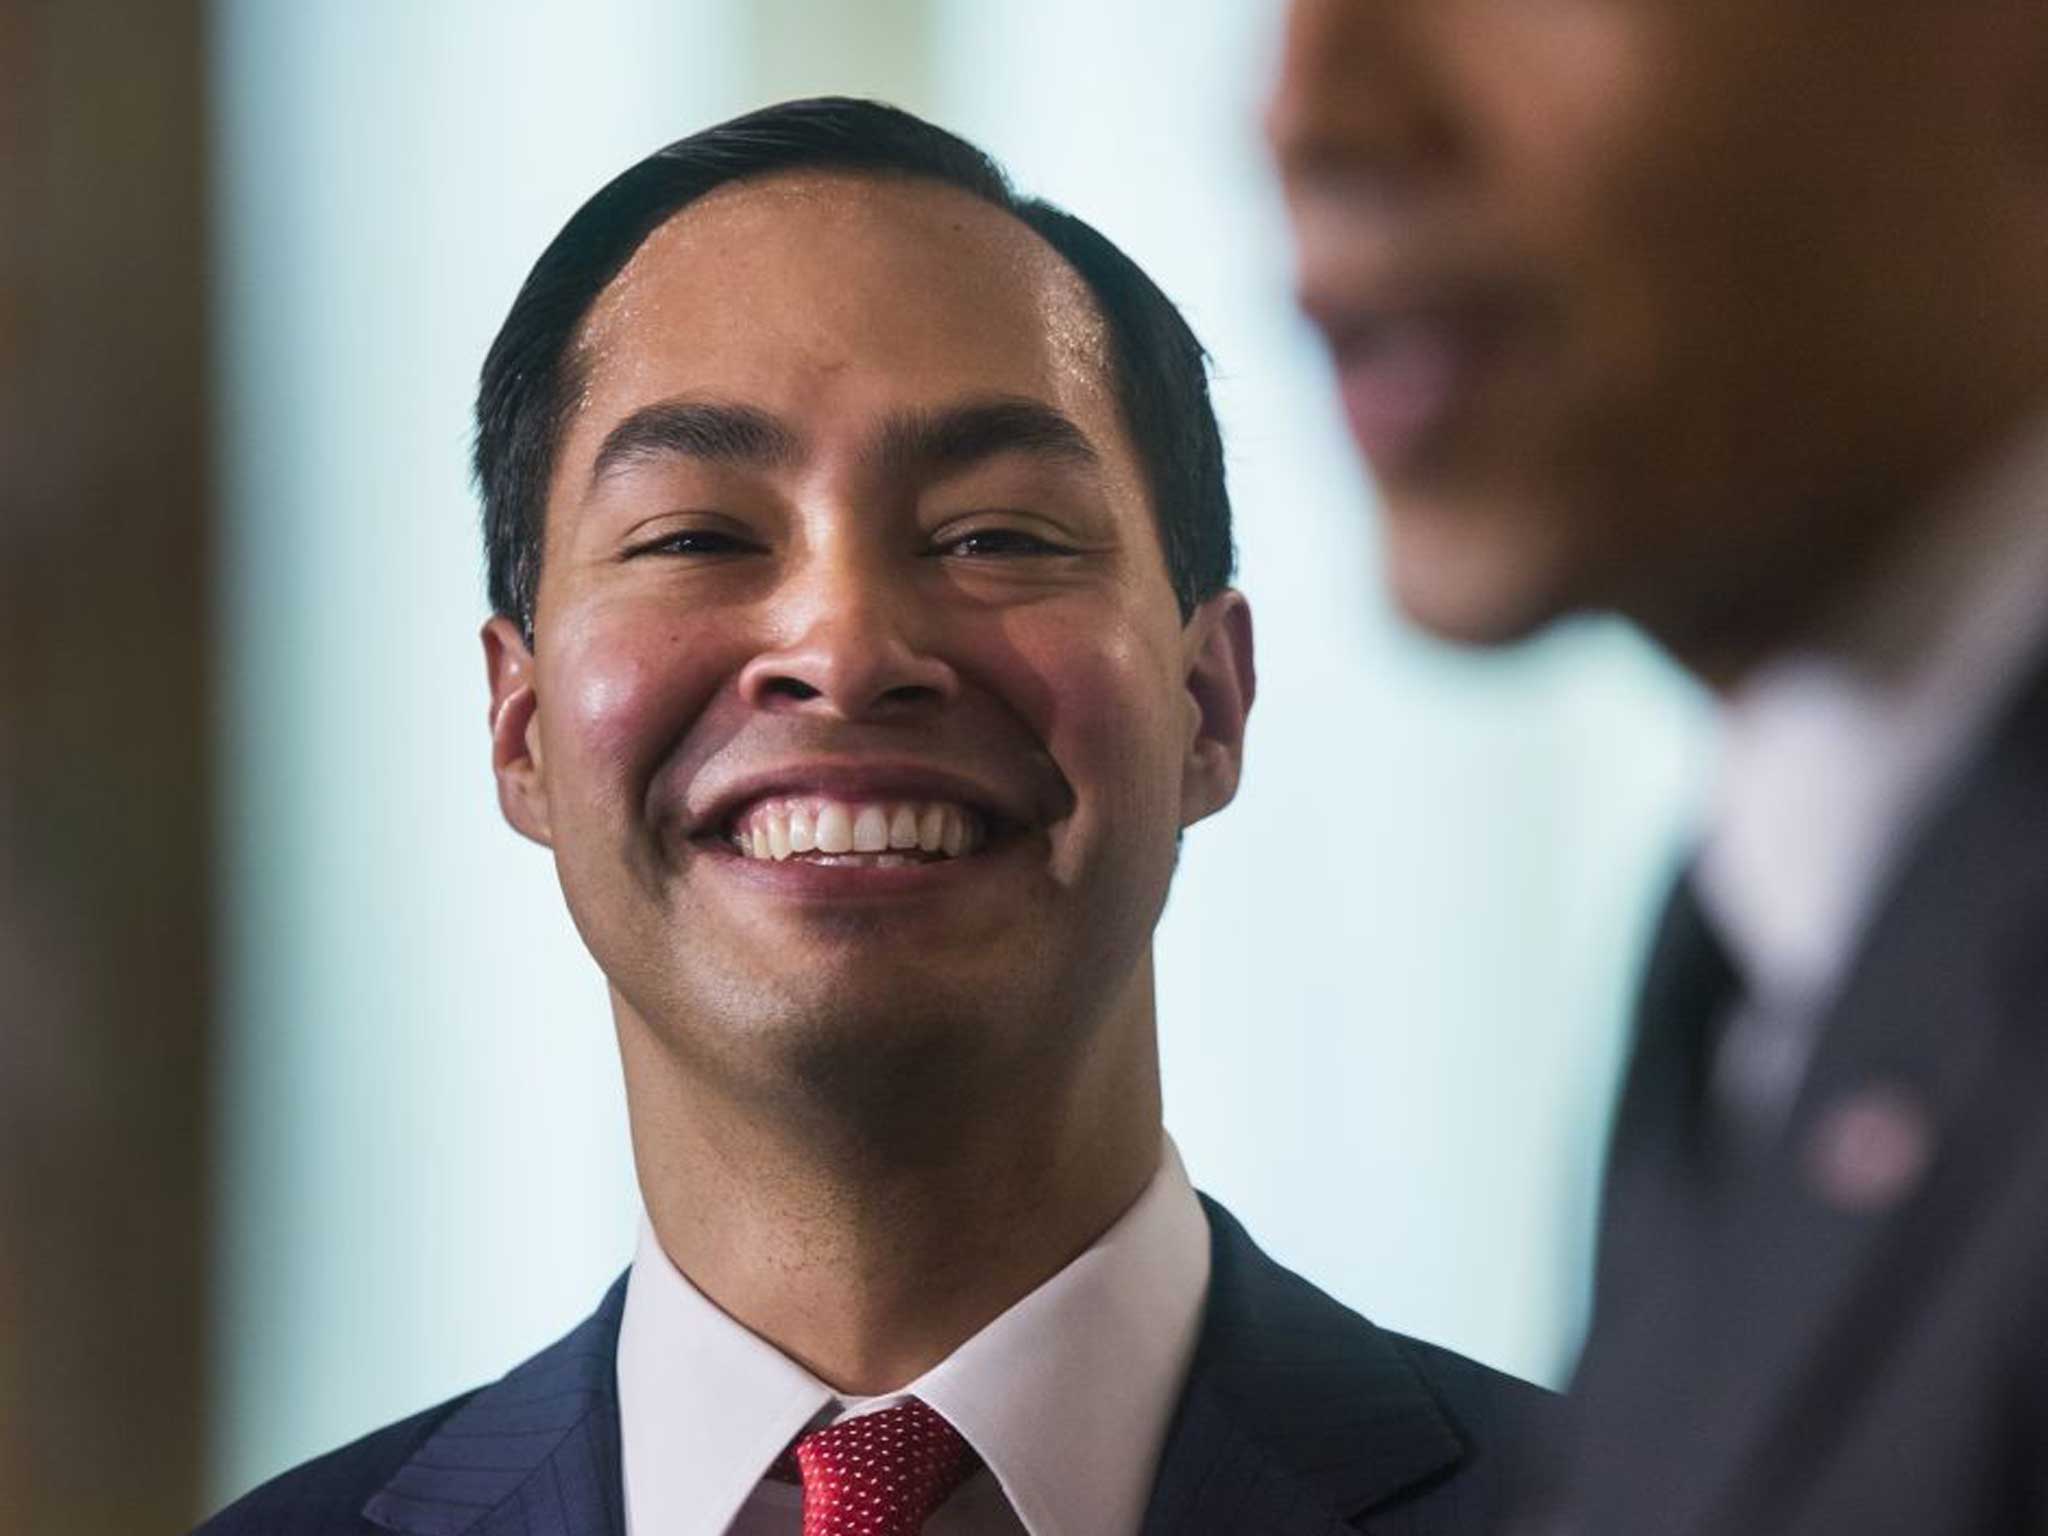 Julián Castro is a rising star of President Obama’s administration